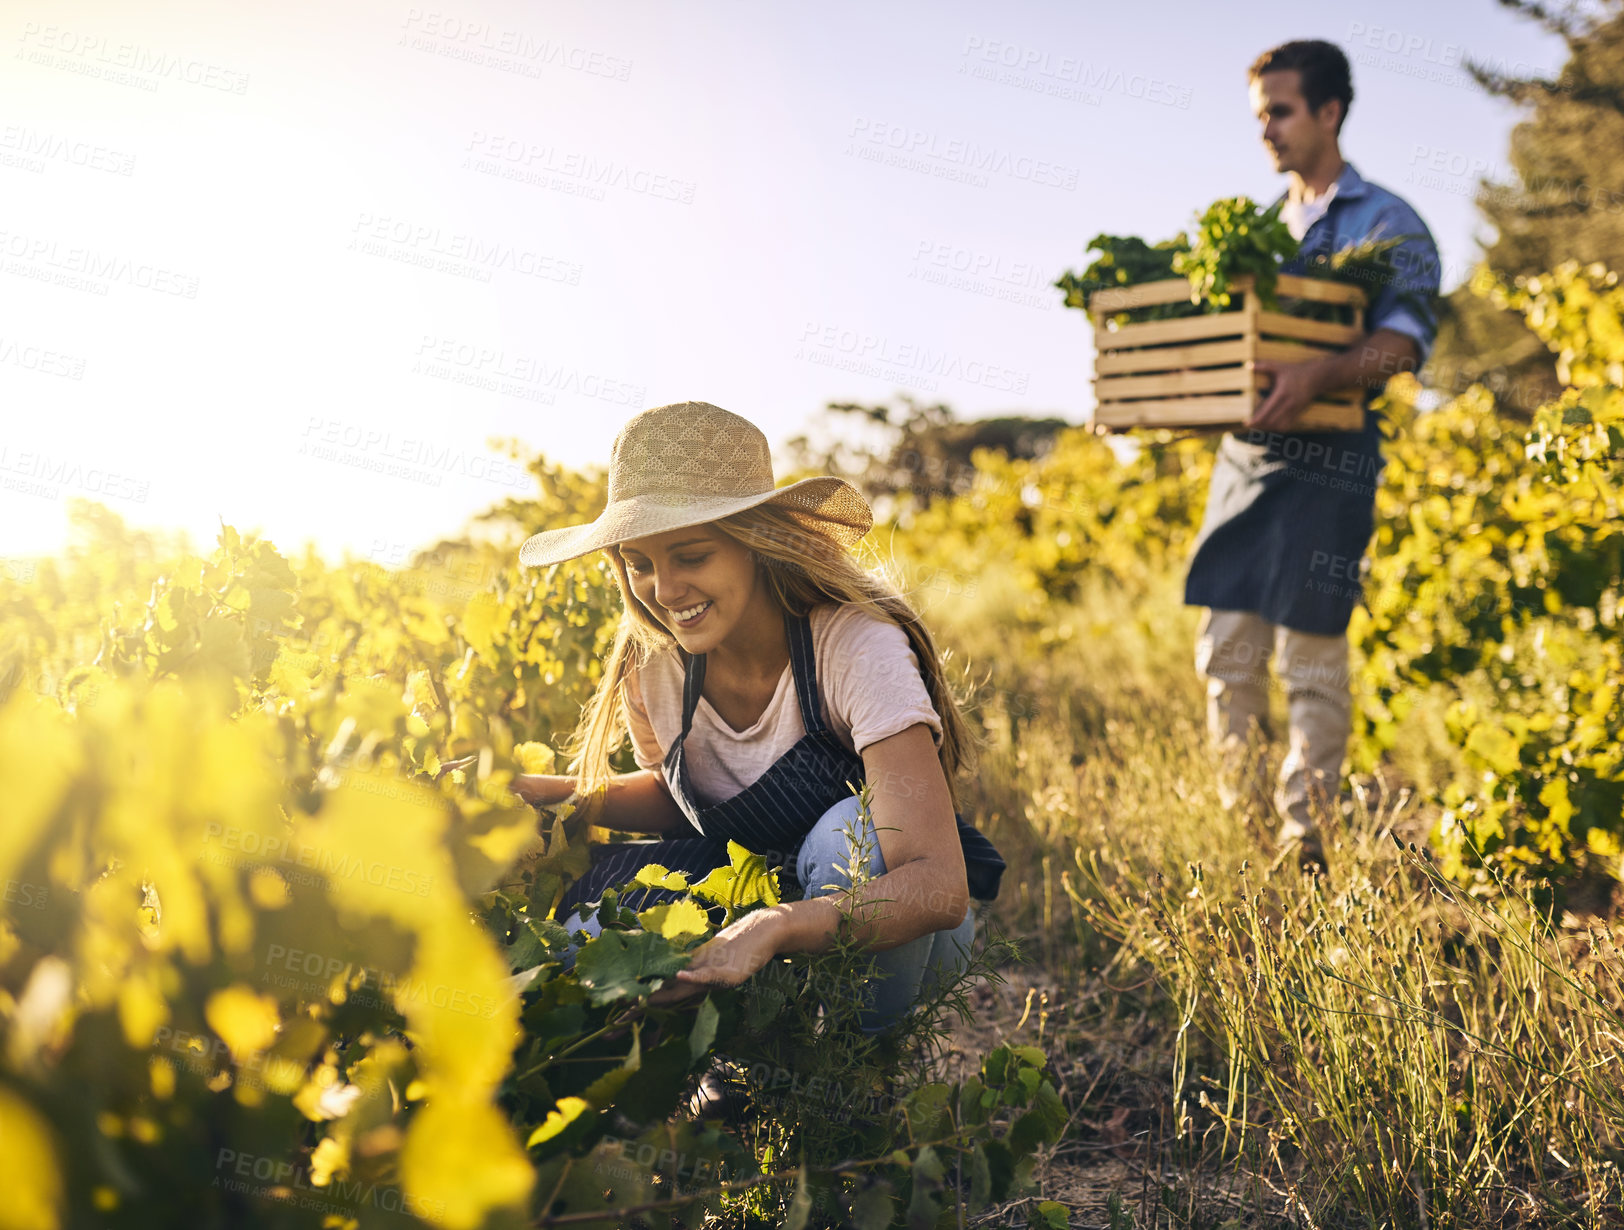 Buy stock photo Shot of a young man and woman working together on a farm